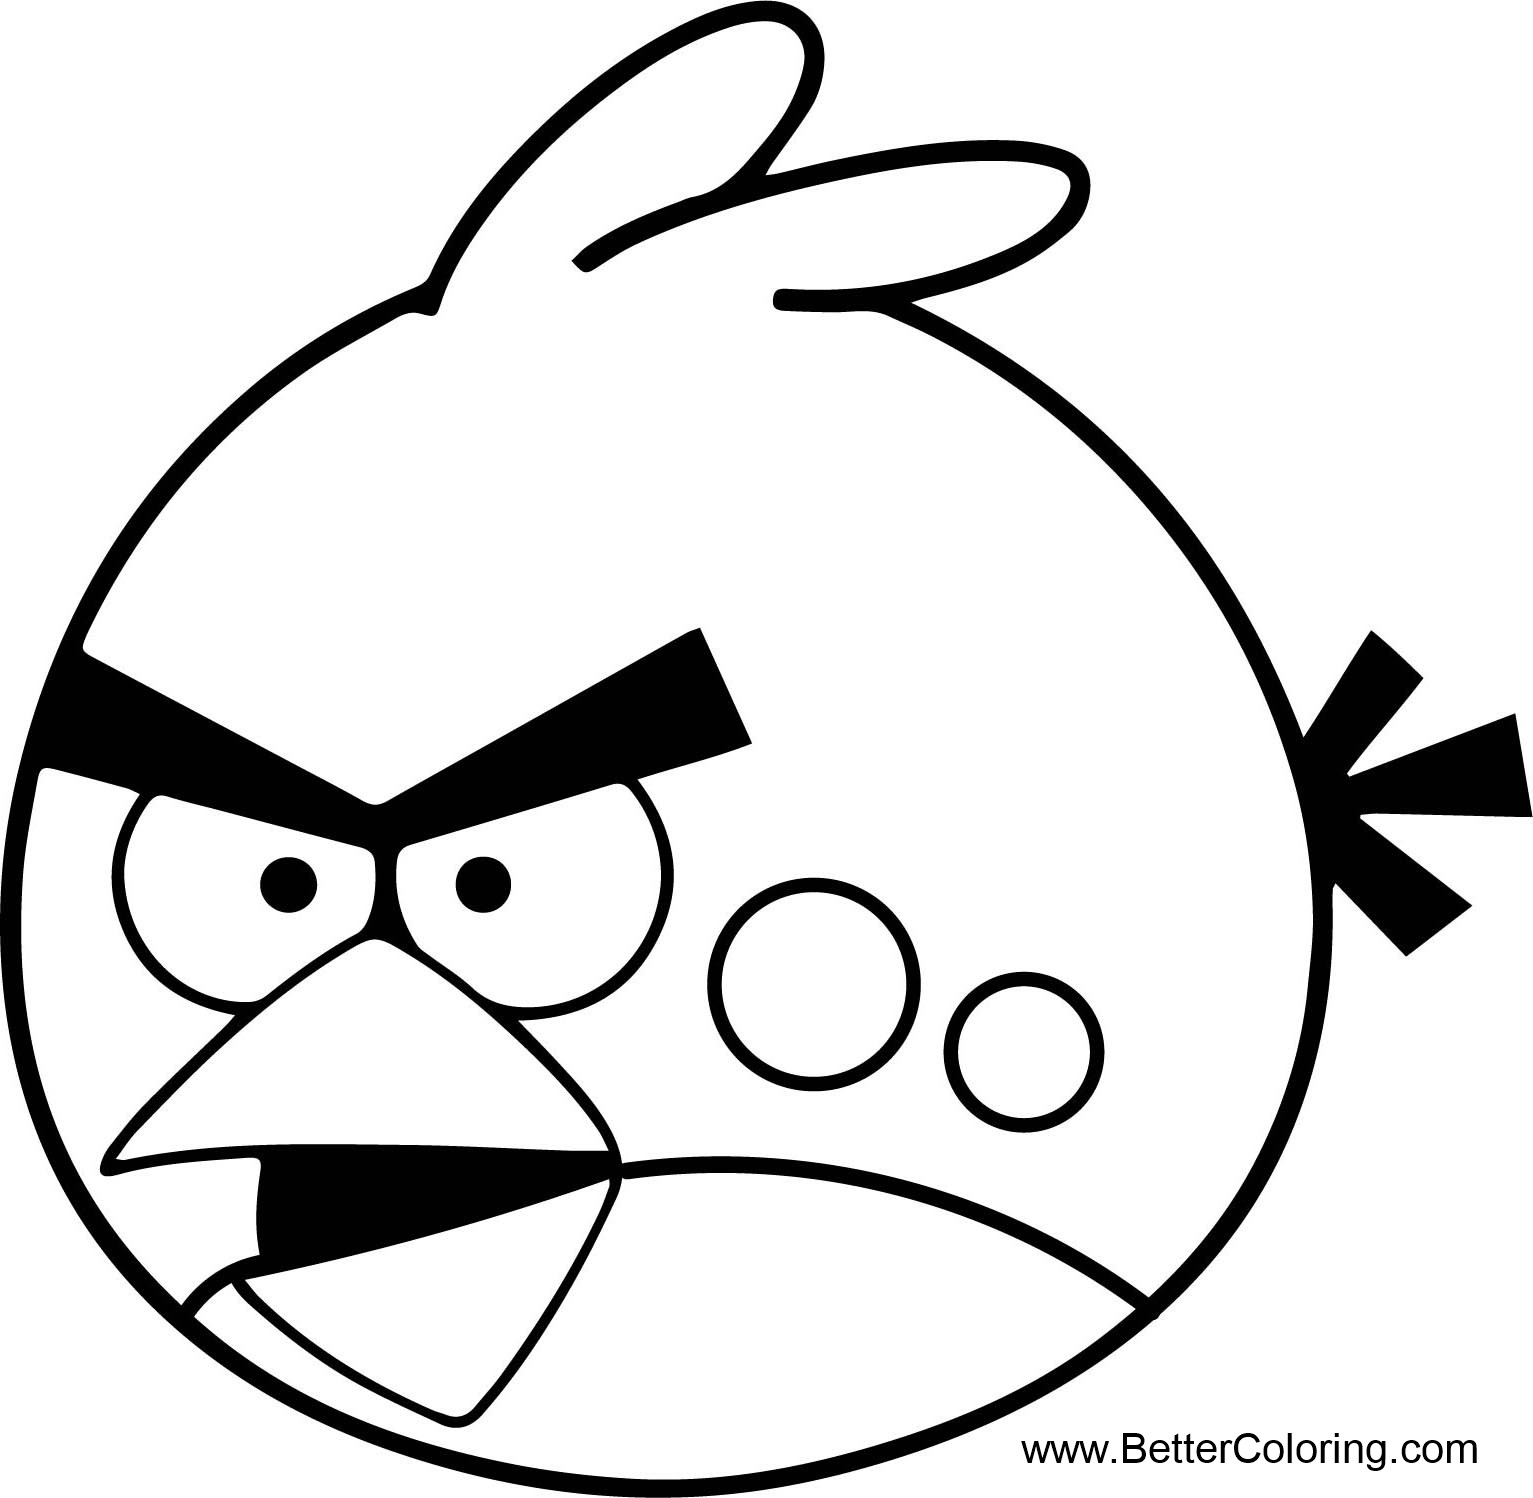 Free Angry Birds Coloring Pages Line Art printable